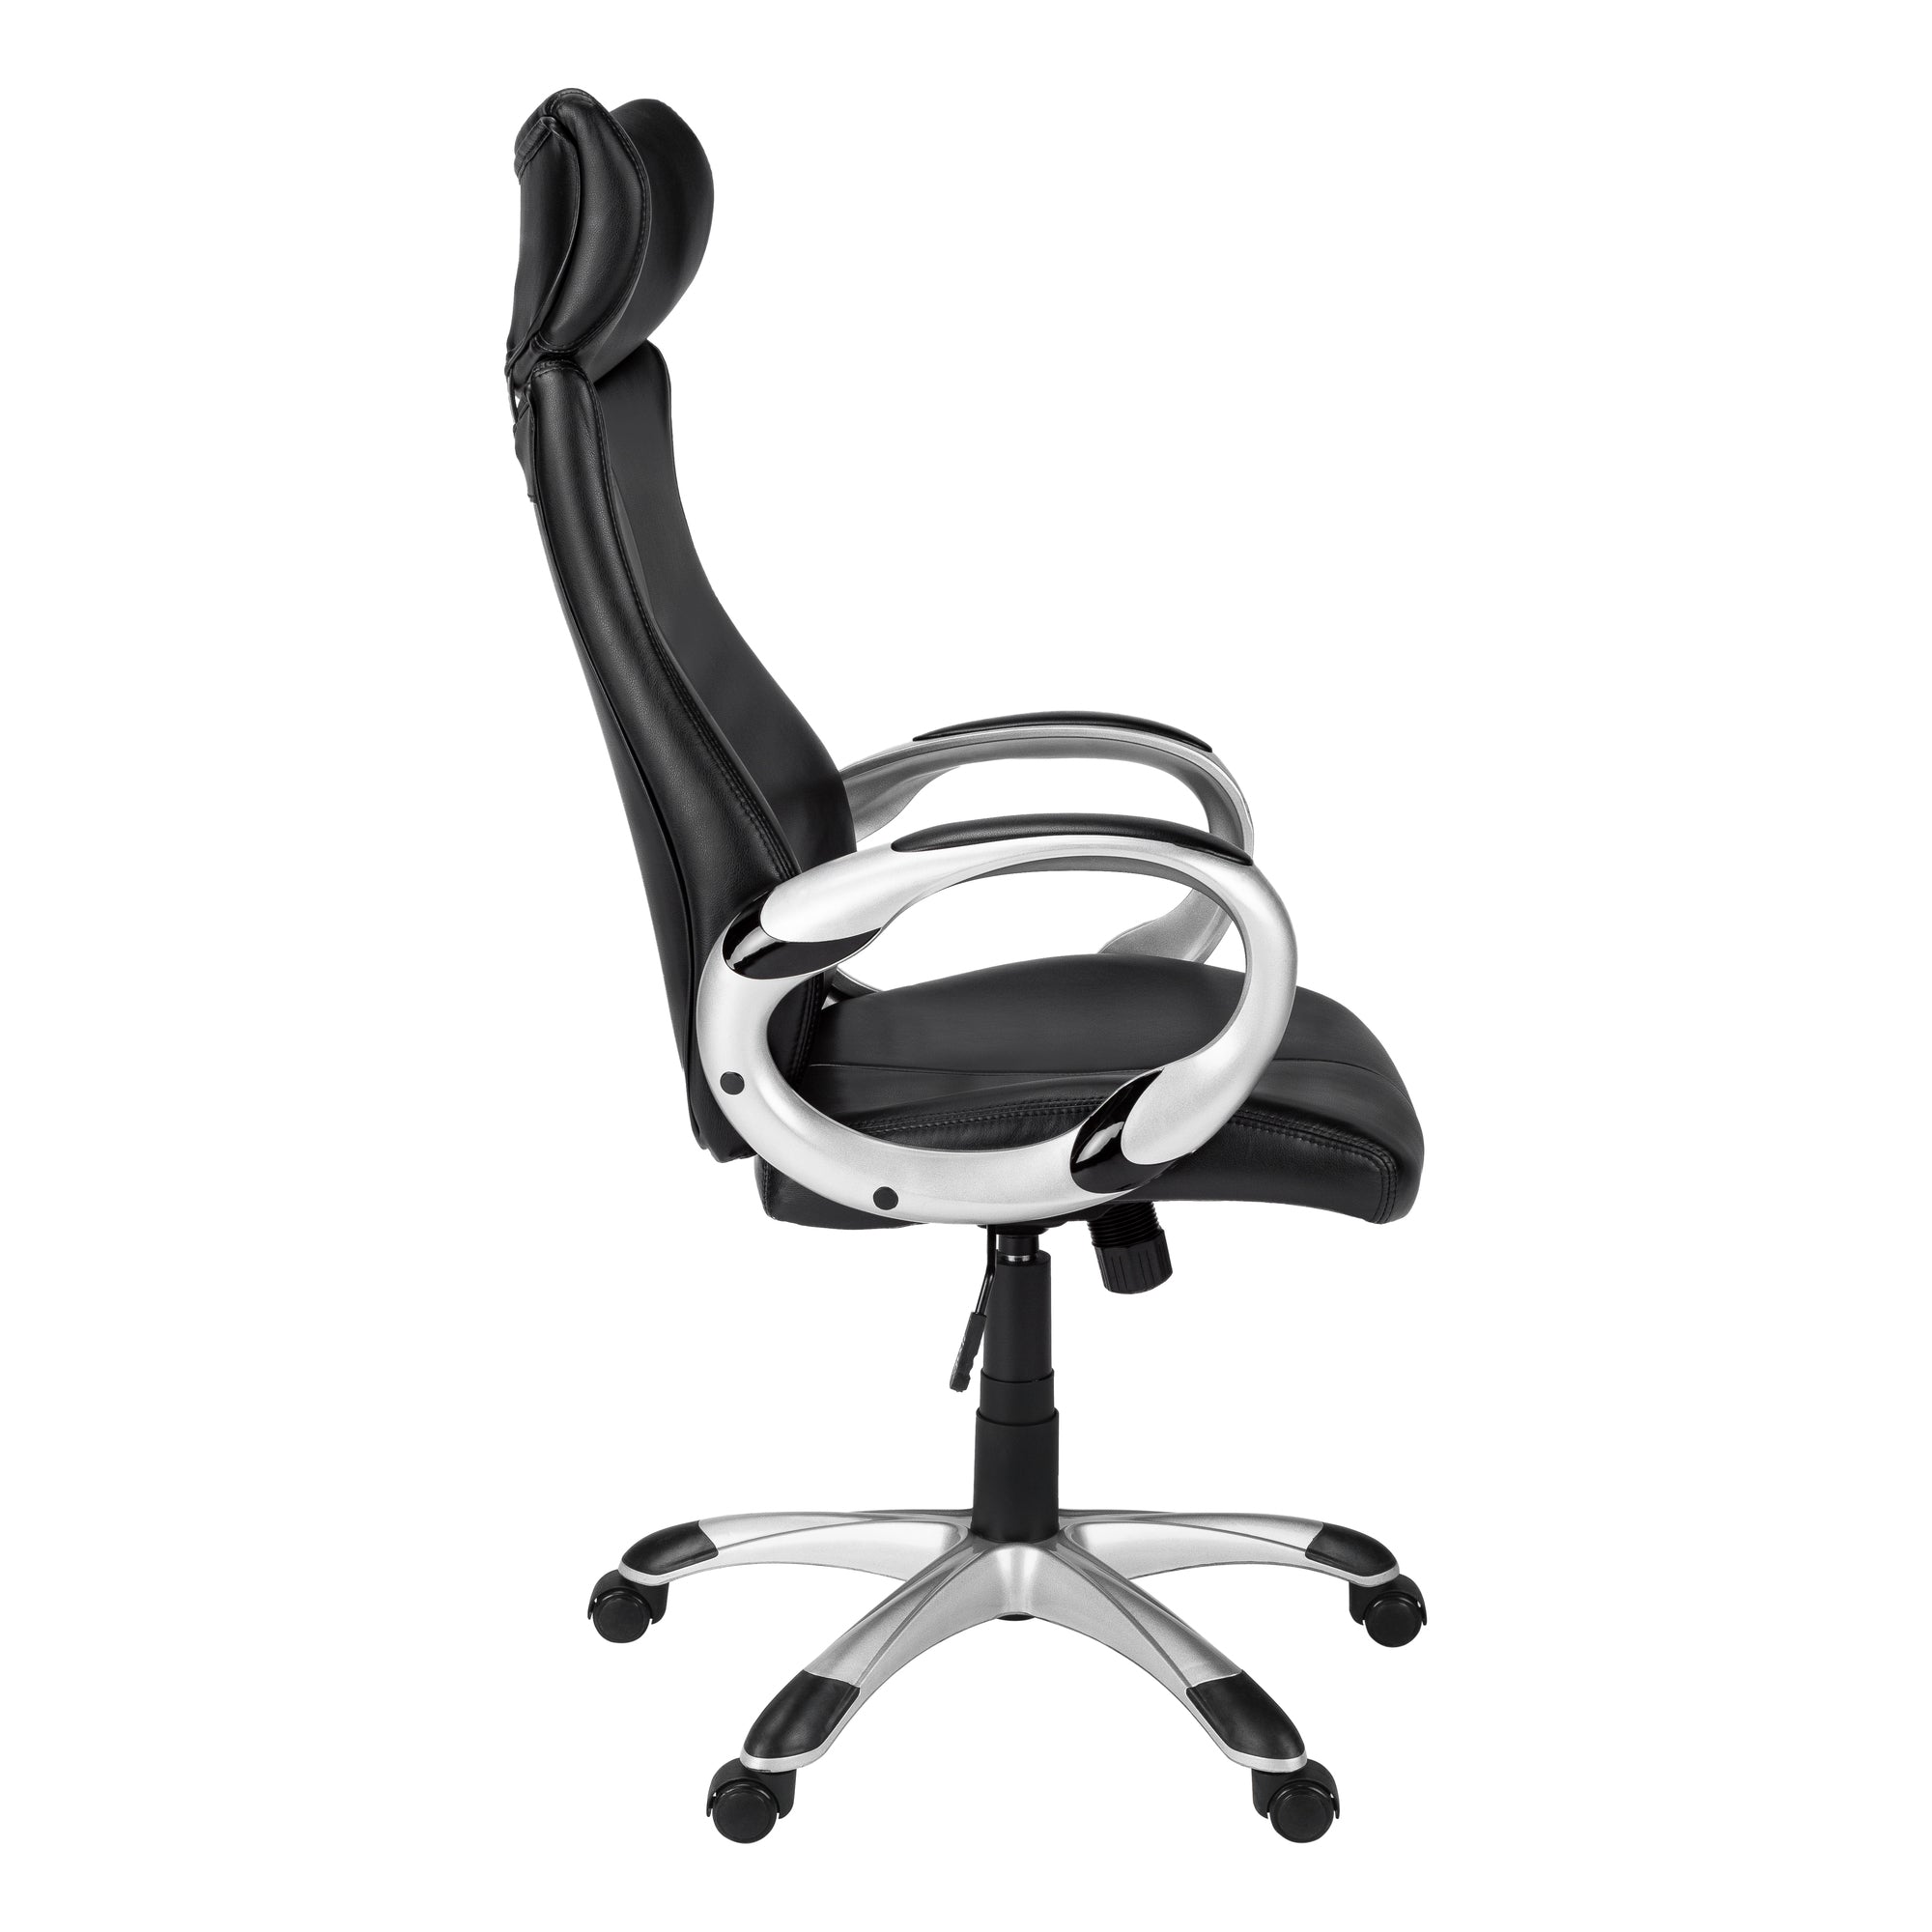 OFFICE CHAIR - BLACK LEATHER-LOOK / HIGH BACK EXECUTIVE